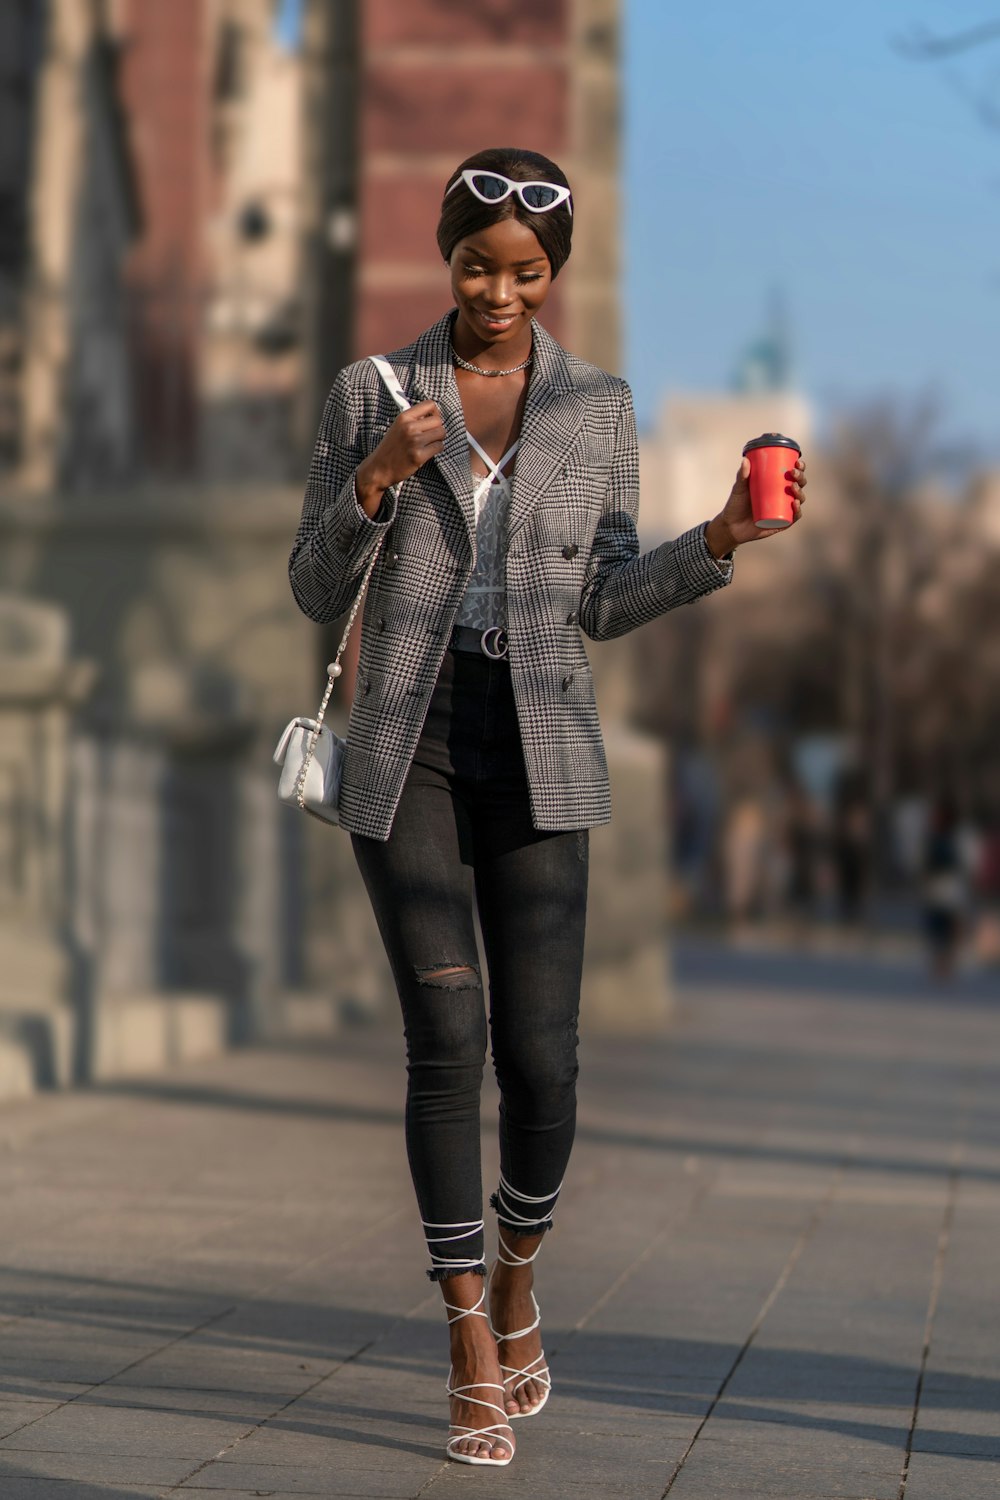 woman in gray blazer and black pants standing on road during daytime